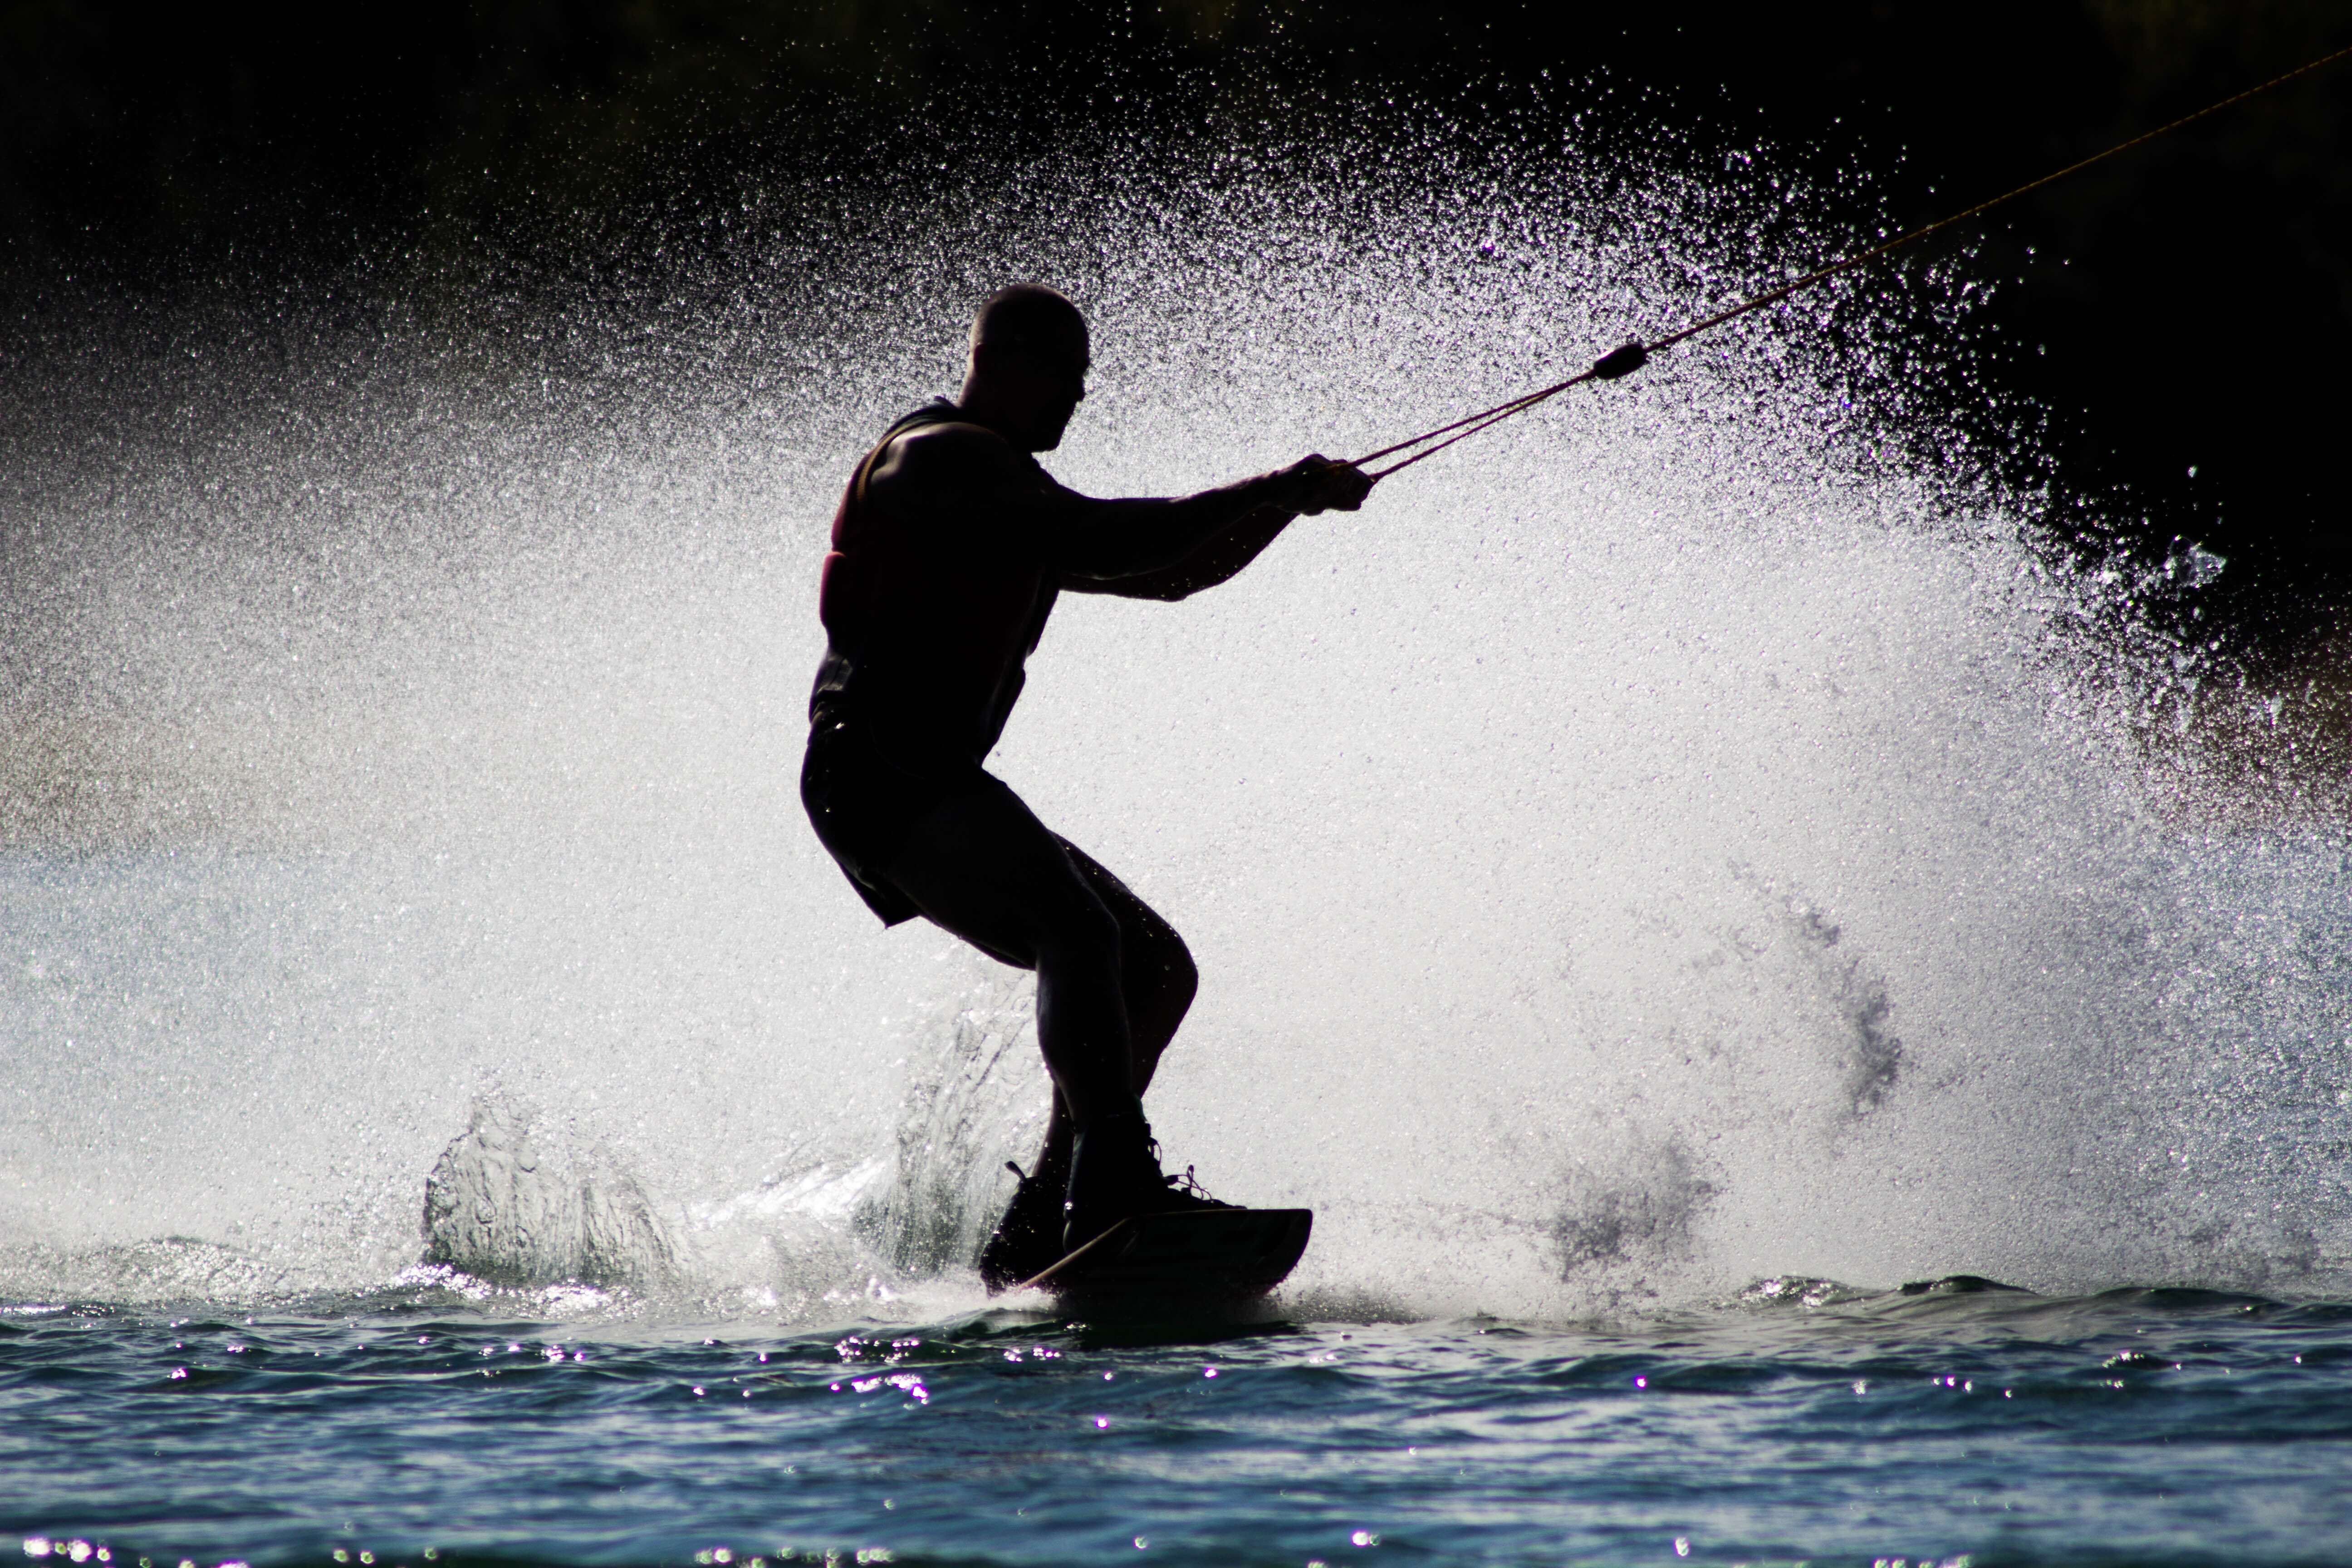 Top 5 Tips For Slalom Water Skiing